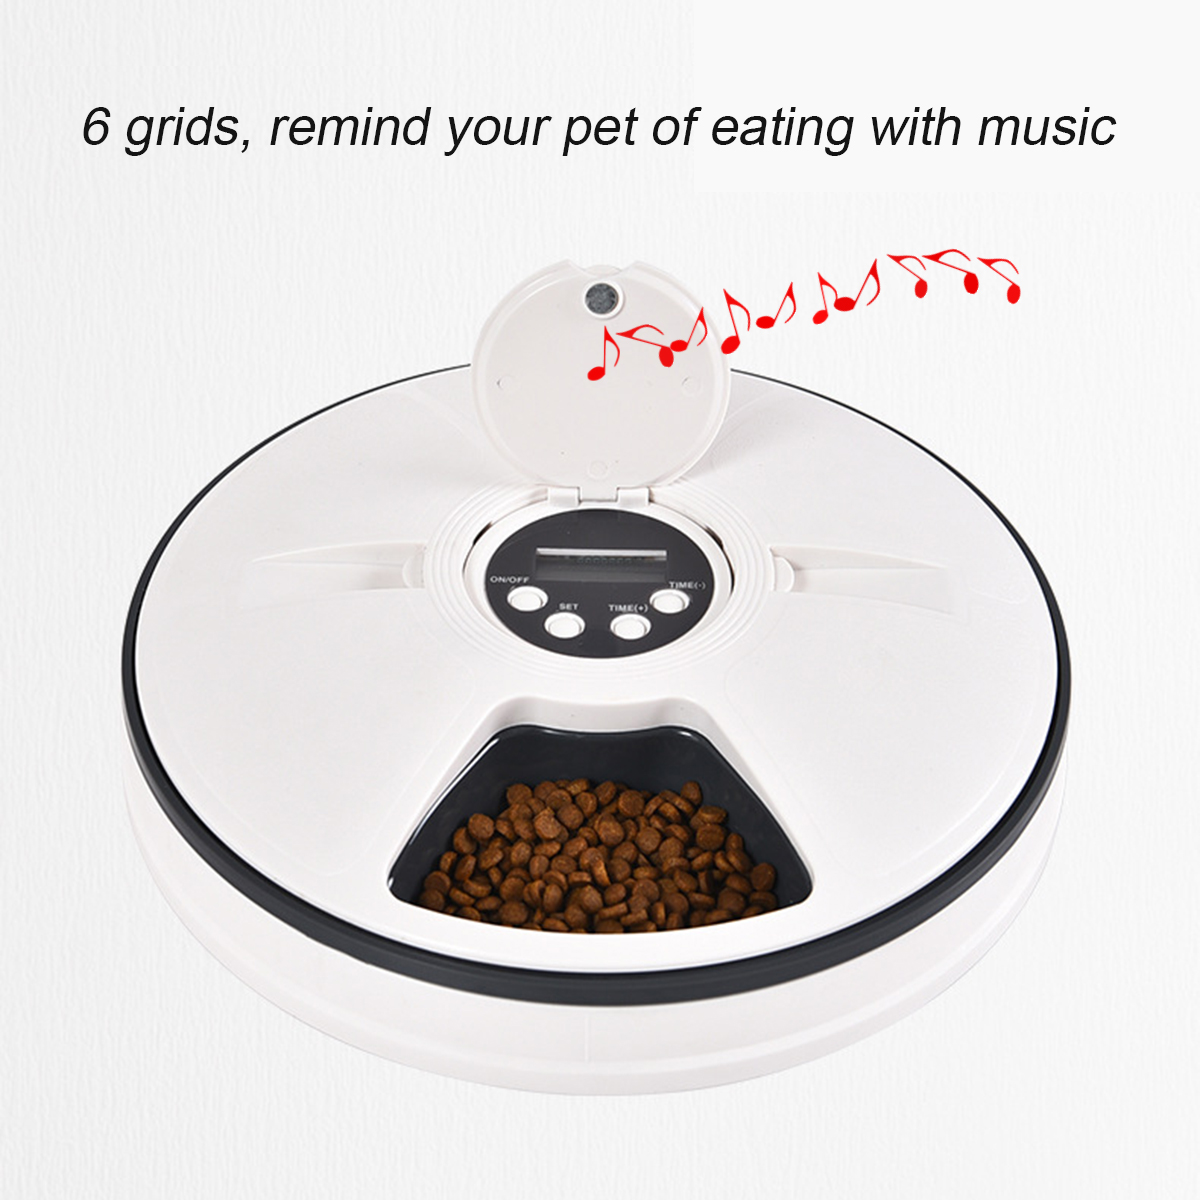 5-Meal-Automatic-Dog-and-Cat-Feeder-Dispenser-for-Dogs-Cats--Small-AnimalsWet--Dry-Food-Universal-Wi-1817273-5